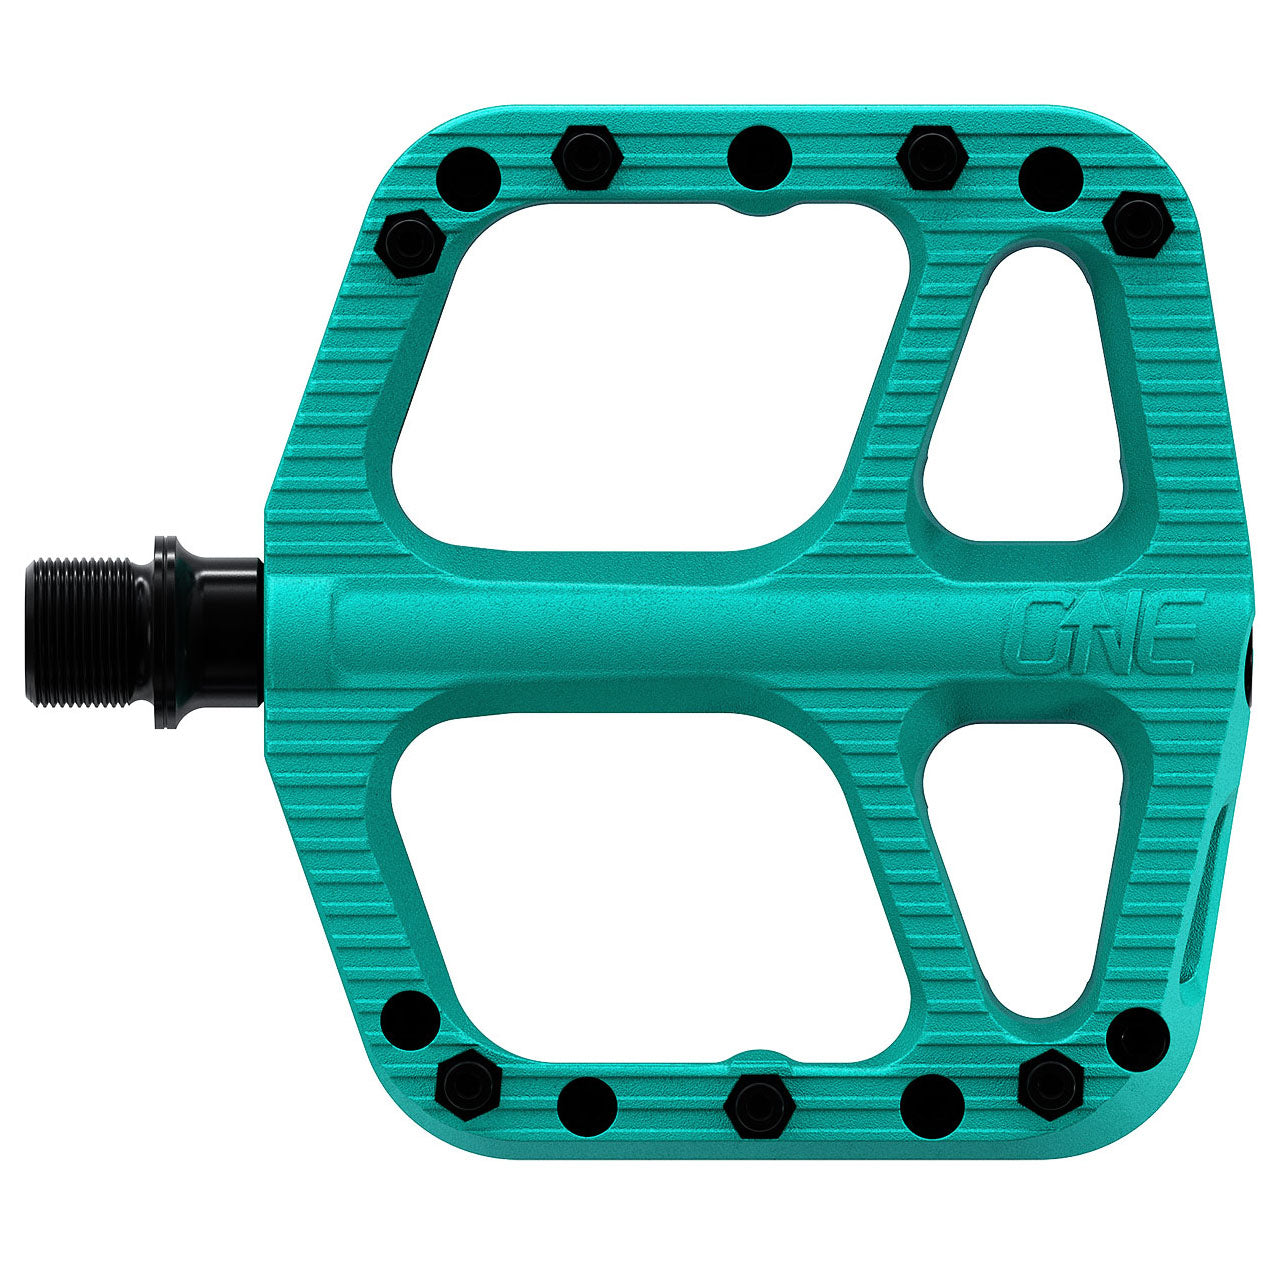 OneUp Components Small Comp Platform Pedals Turquoise